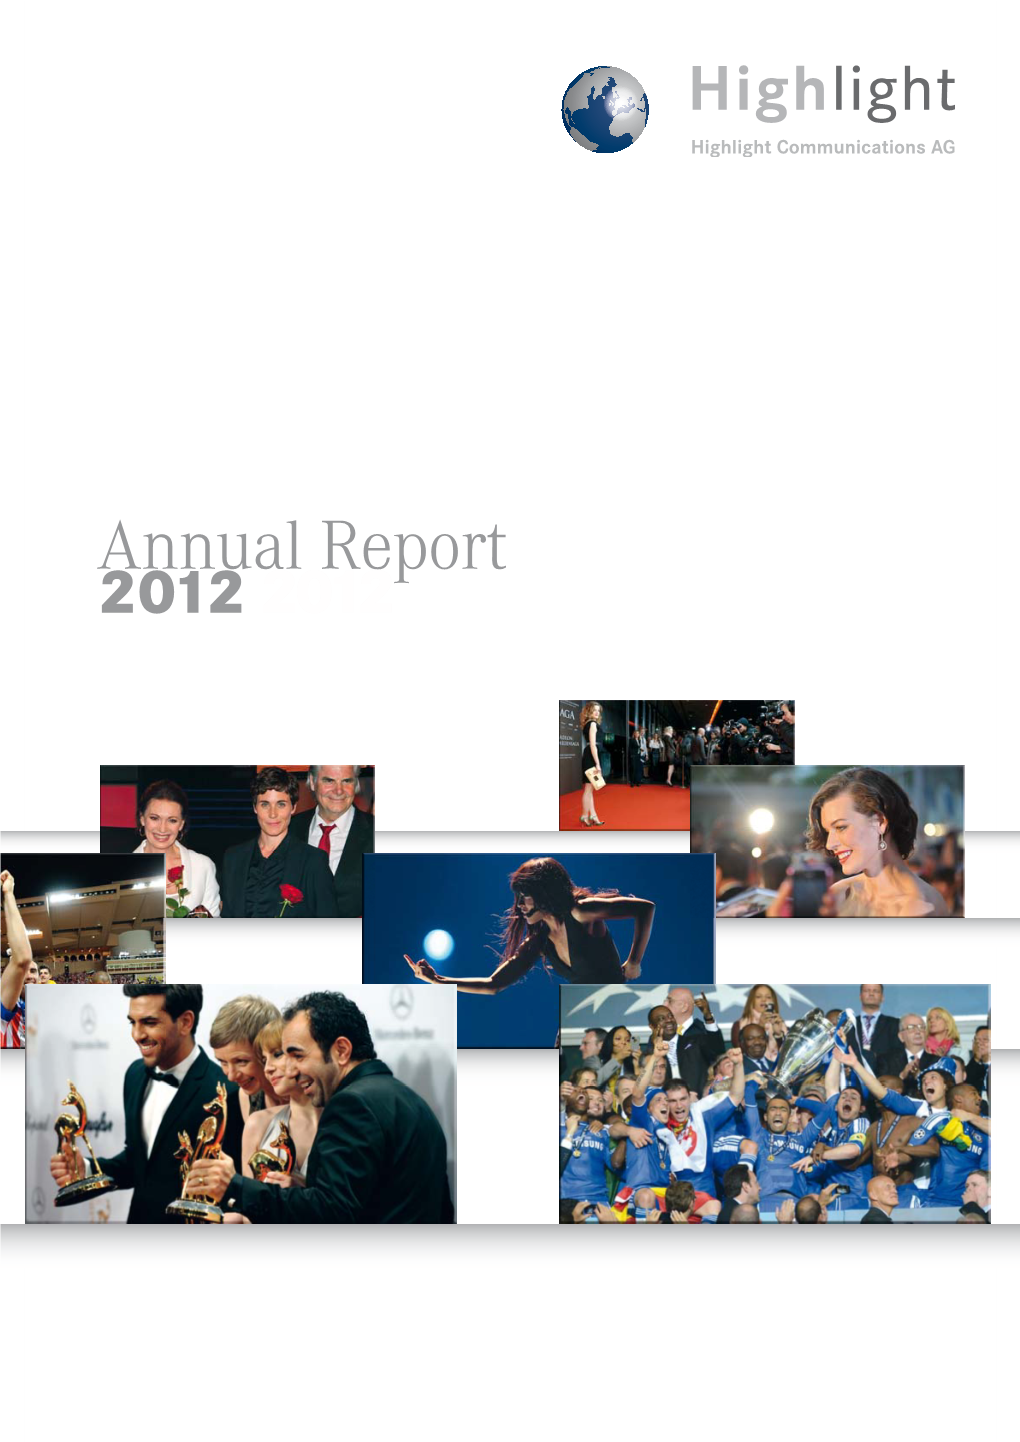 Annual Report Swiss-Based Highlight Group Highlight Communications AG Annual Report 2012 2012 Comprises Companies with Considerable Synergy Potential